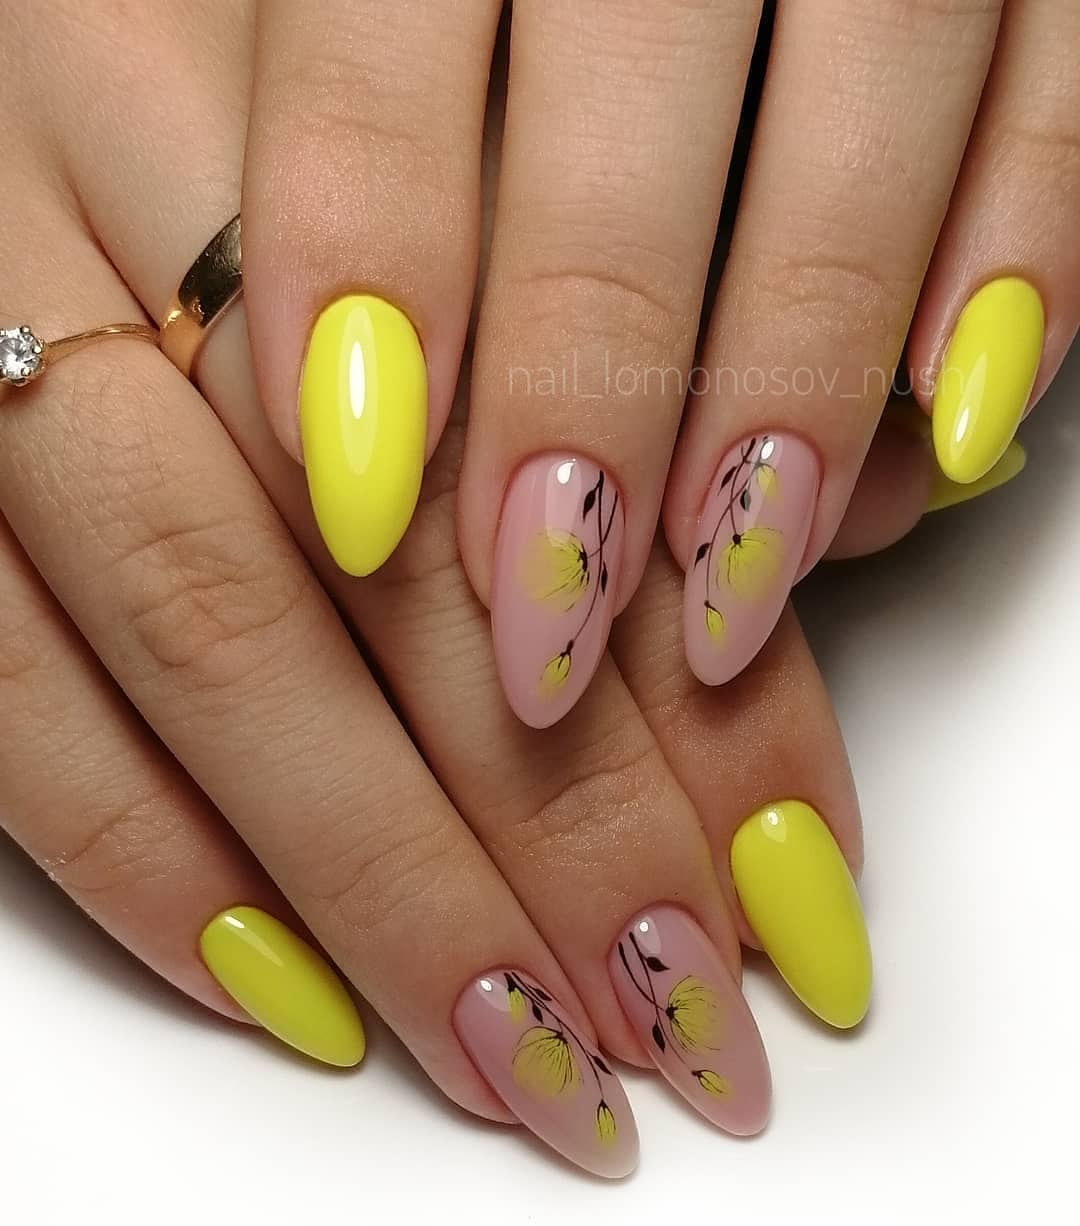 Over 100 Bright Summer Nail Art Designs That Will Be So Trendy images 18